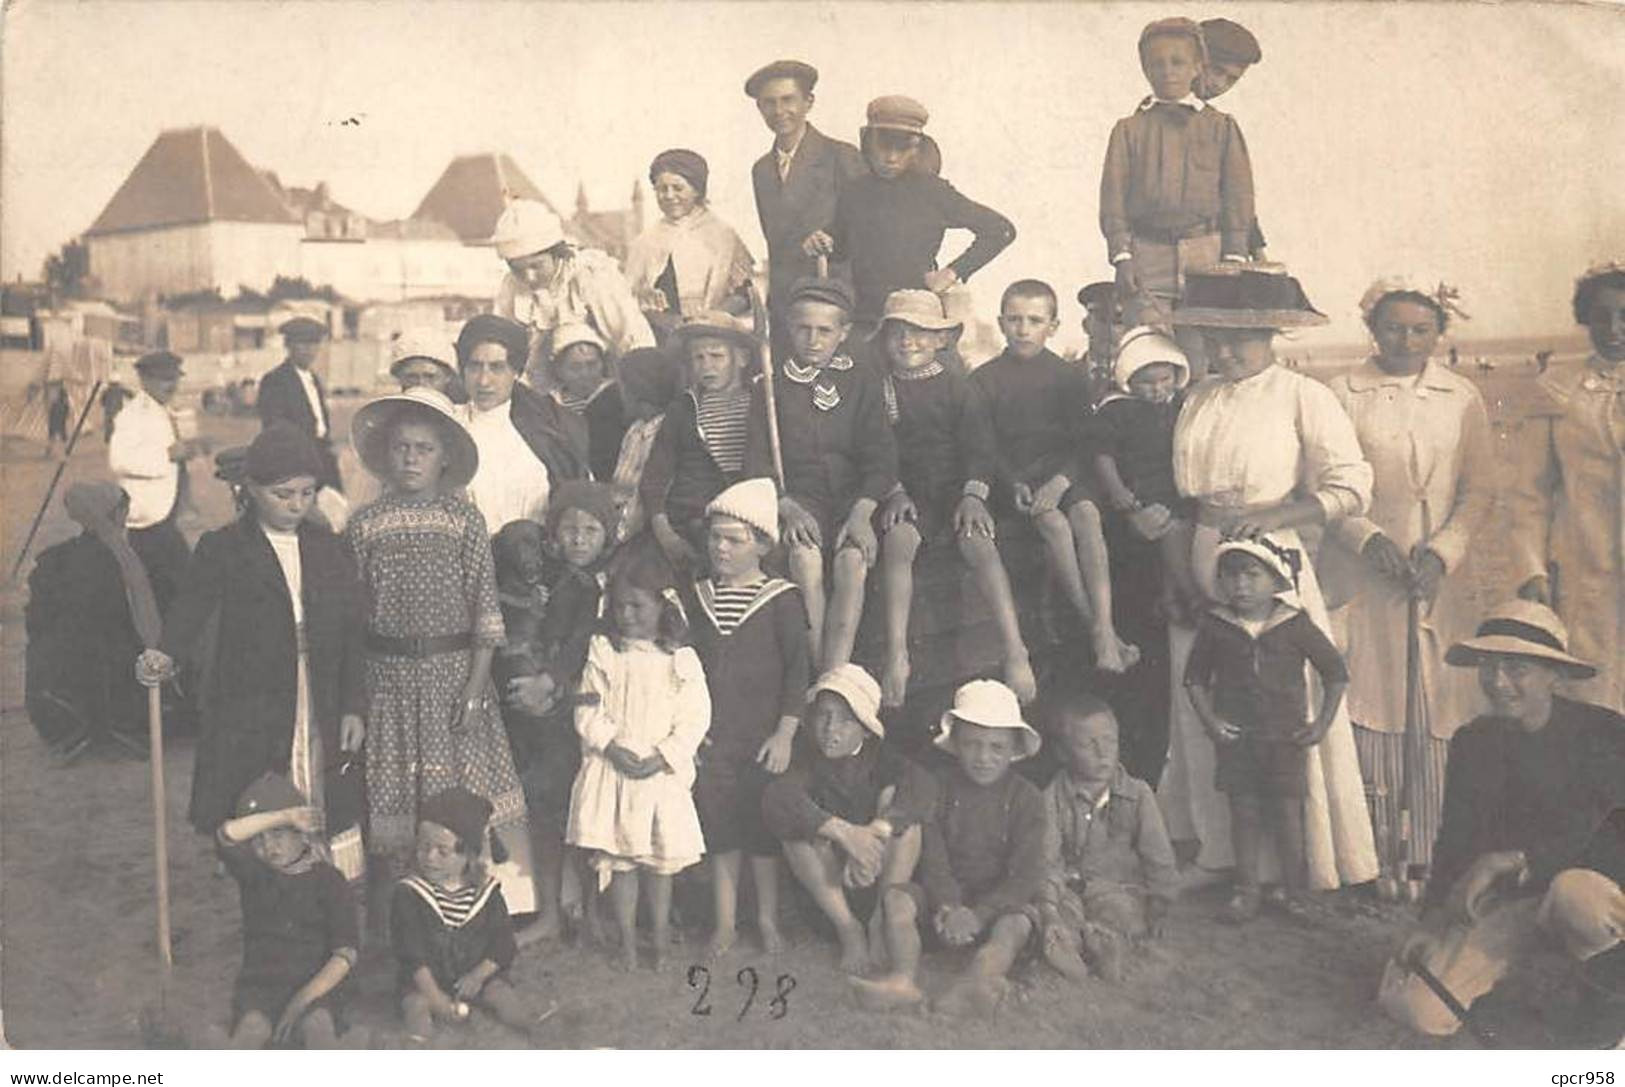 A Localiser - N°84443 - Groupe Sur Une Plage - Carte Photo - To Identify